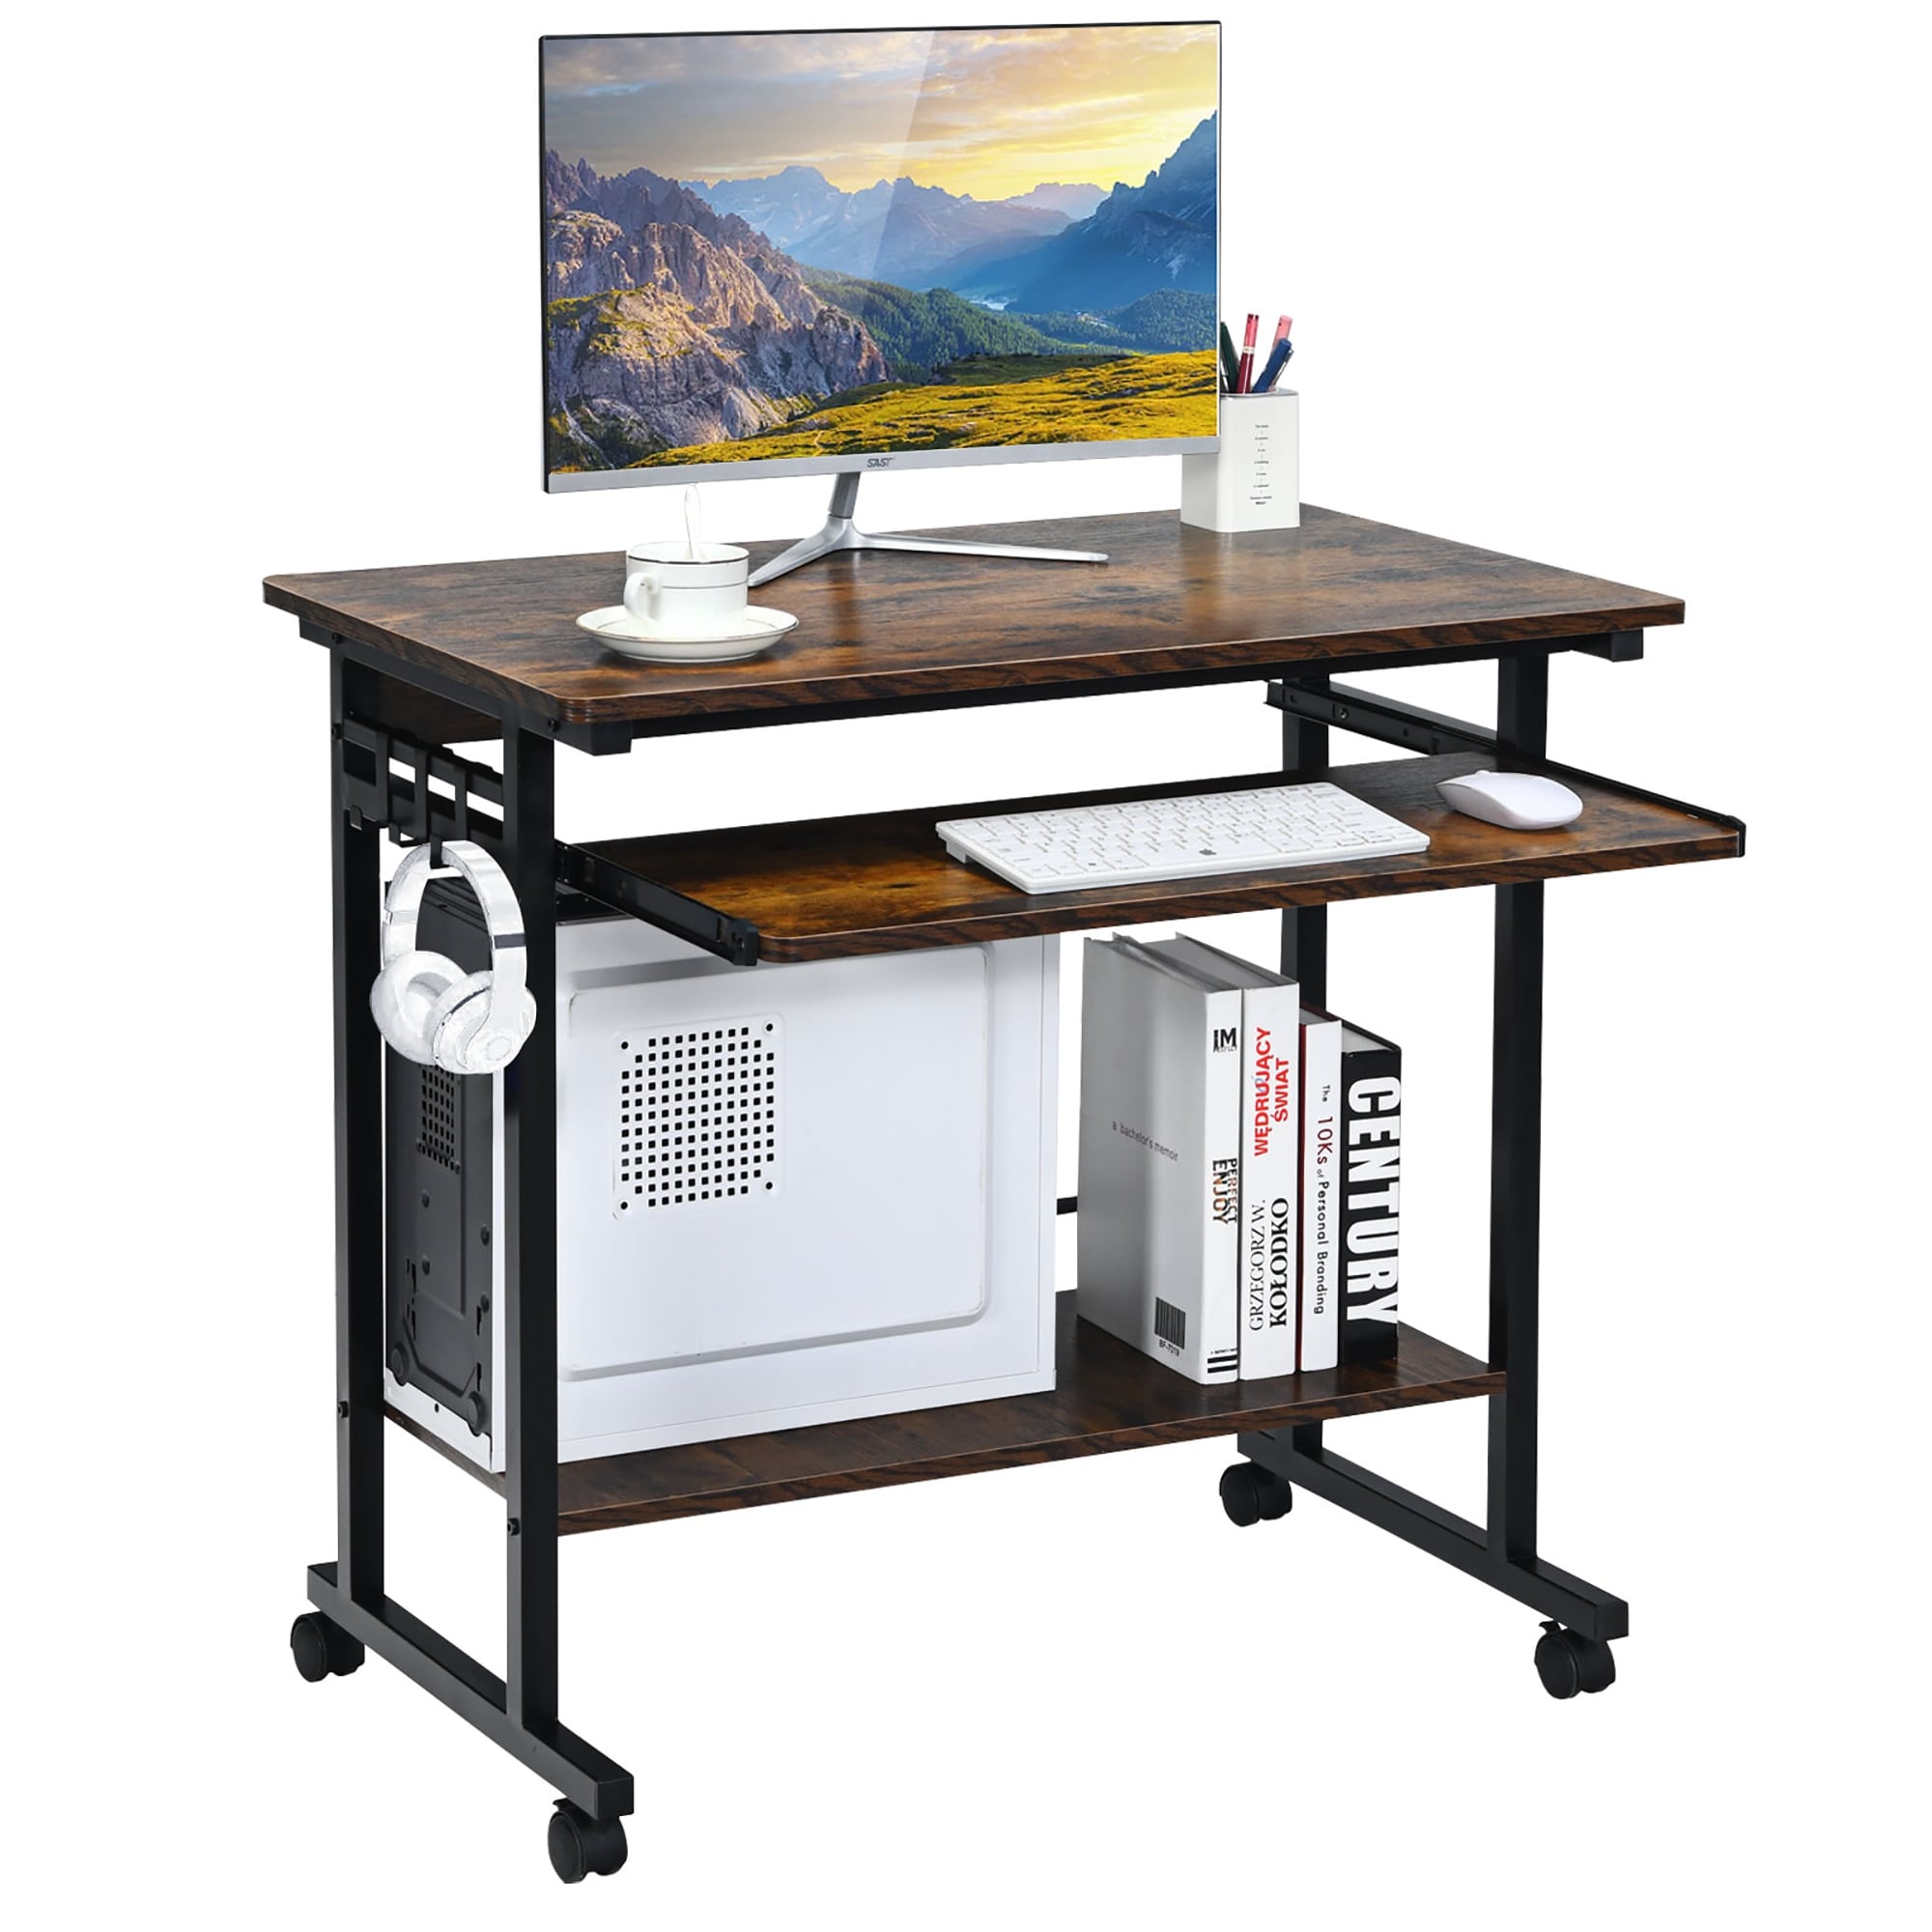 https://ak1.ostkcdn.com/images/products/is/images/direct/040c1a24ce1ae04b845055c8f29c0da8c70e9000/Costway-Computer-Desk-Rolling-Laptop-Cart-Writing-Workstation-w-.jpg